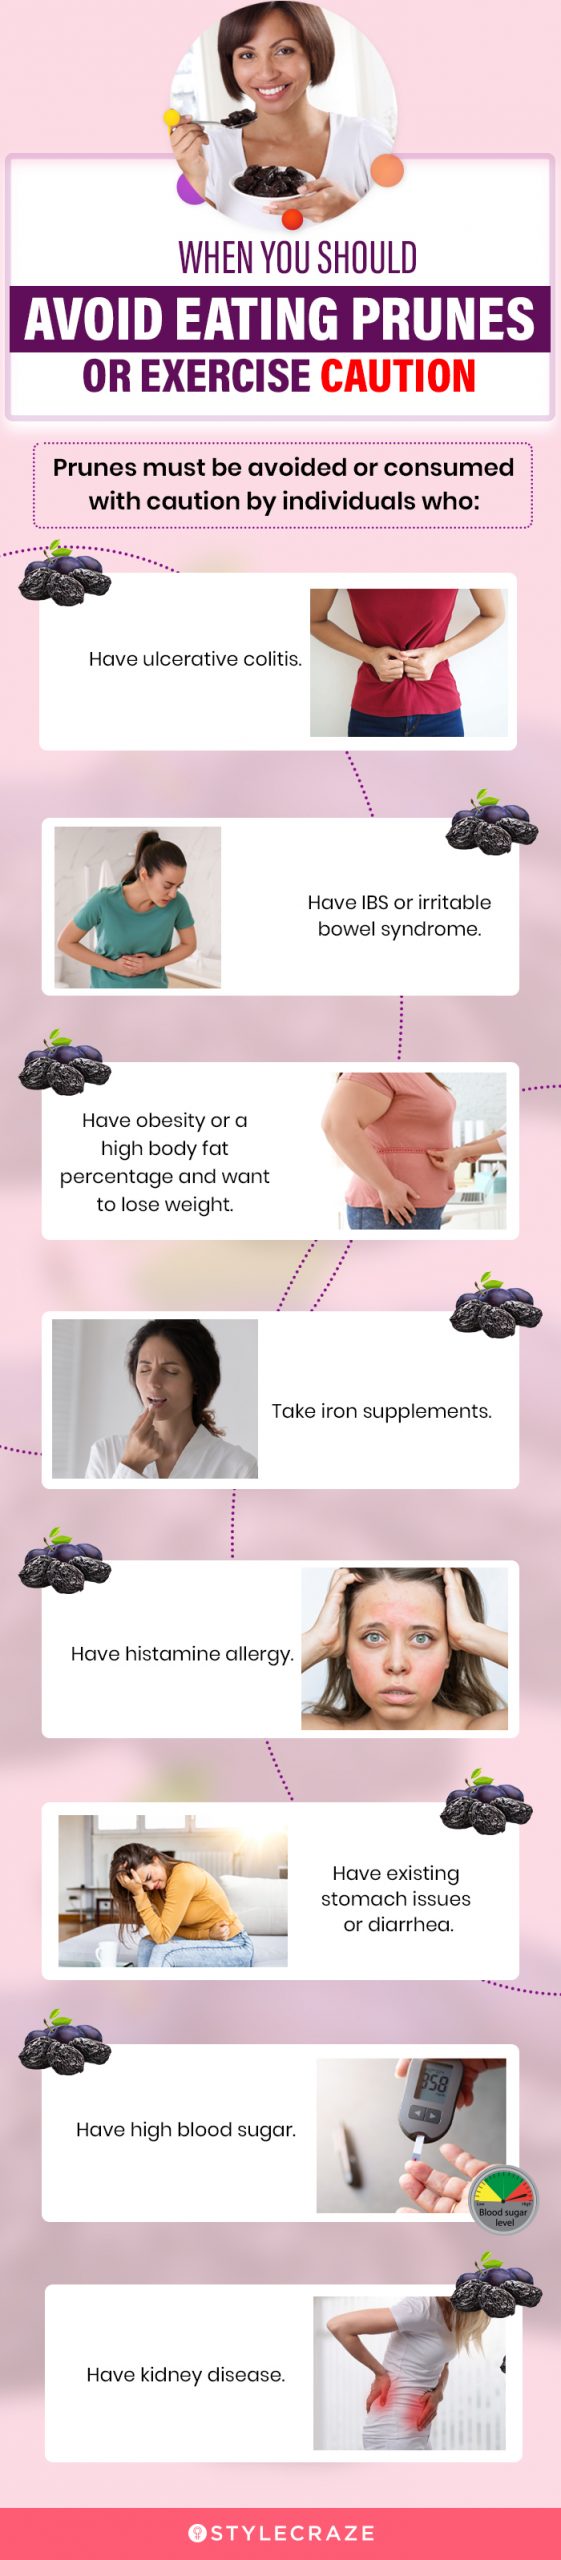 when you should avoid eating prunes or exercise (infographic)